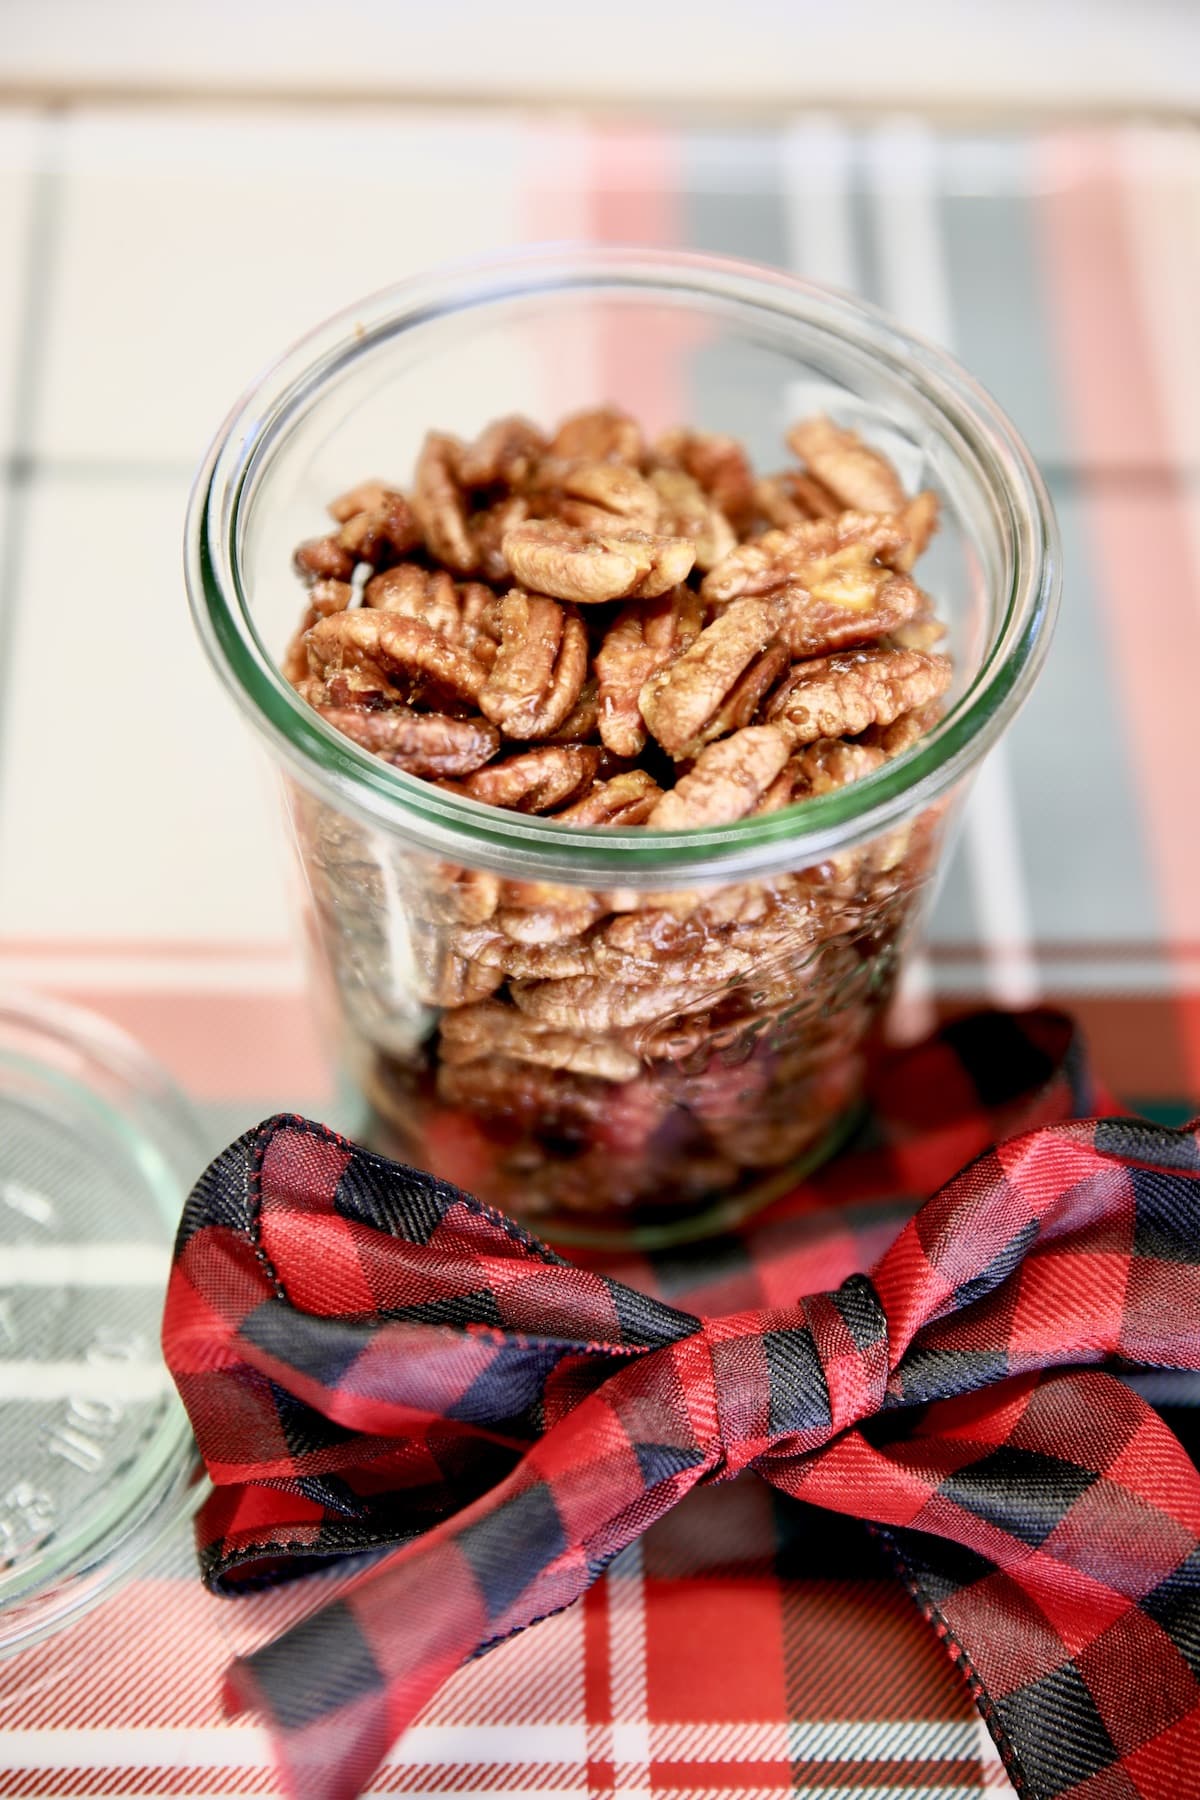 Jar of candied walnuts with holiday bow.